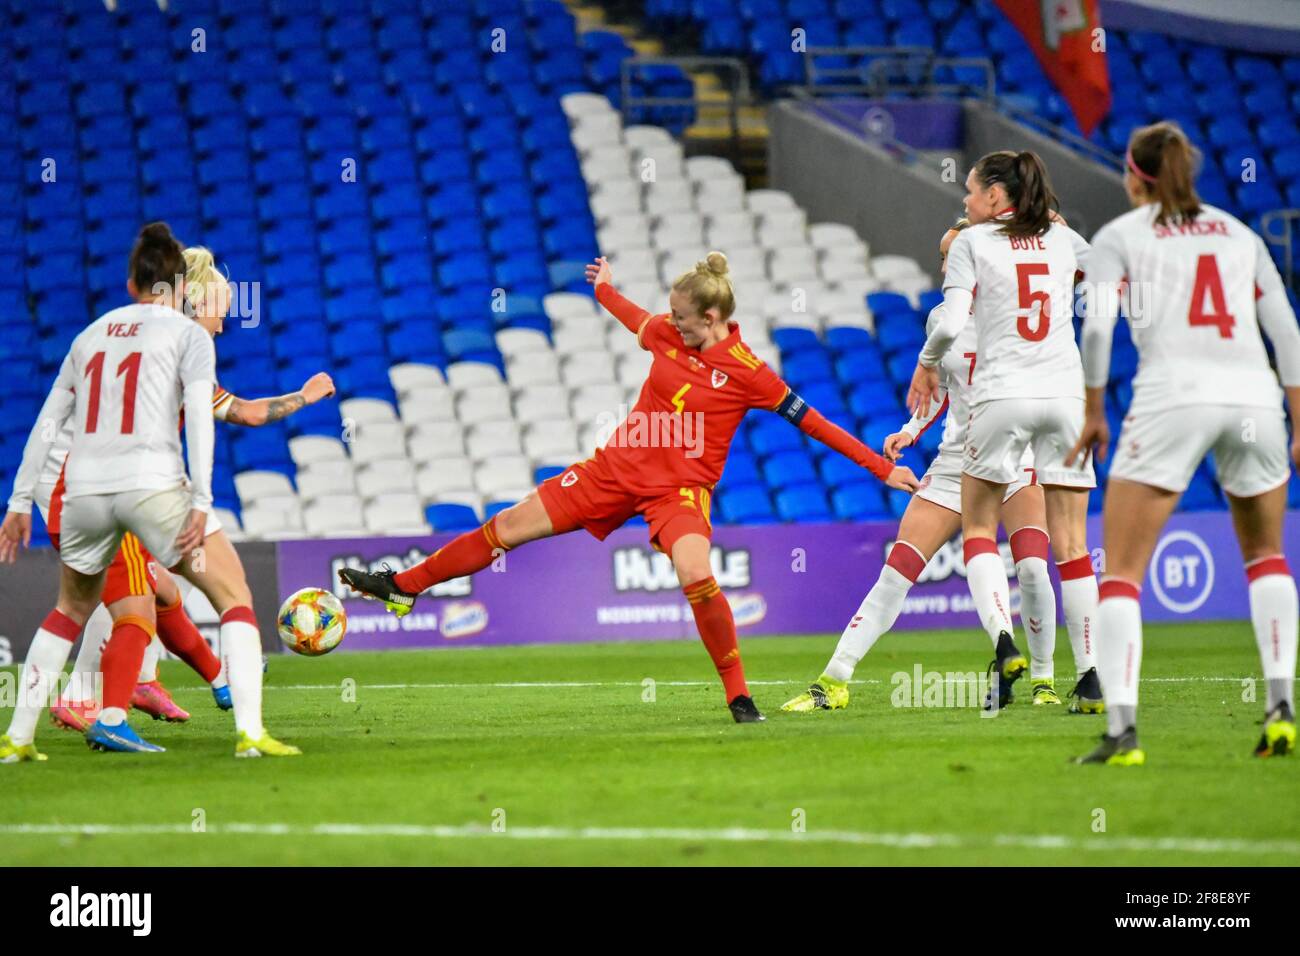 Cardiff, Wales. 13 April, 2021. Sophie Ingle of Wales Women challenges for the ball during the Women's International Friendly match between Wales and Denmark at the Cardiff City Stadium in Cardiff, Wales, UK on 13, April 2021. Credit: Duncan Thomas/Majestic Media/Alamy Live News. Stock Photo